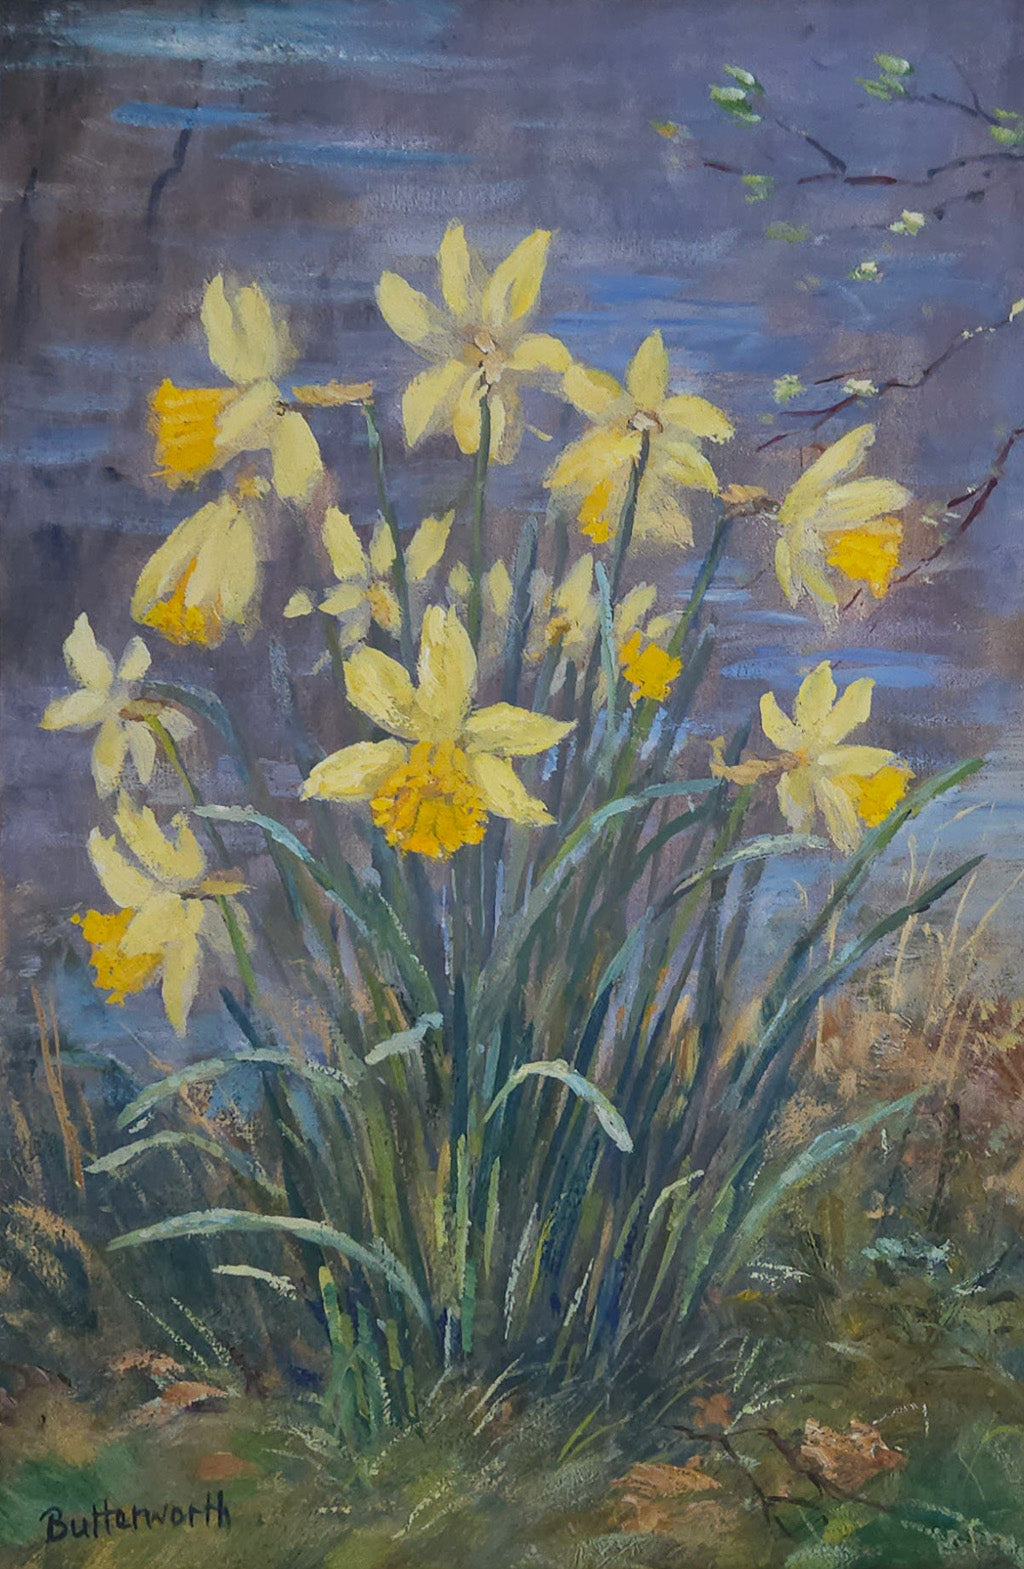 Oil painting of Scottish Daffodils by the pond by aberdeenshire artist Howard Butterworth